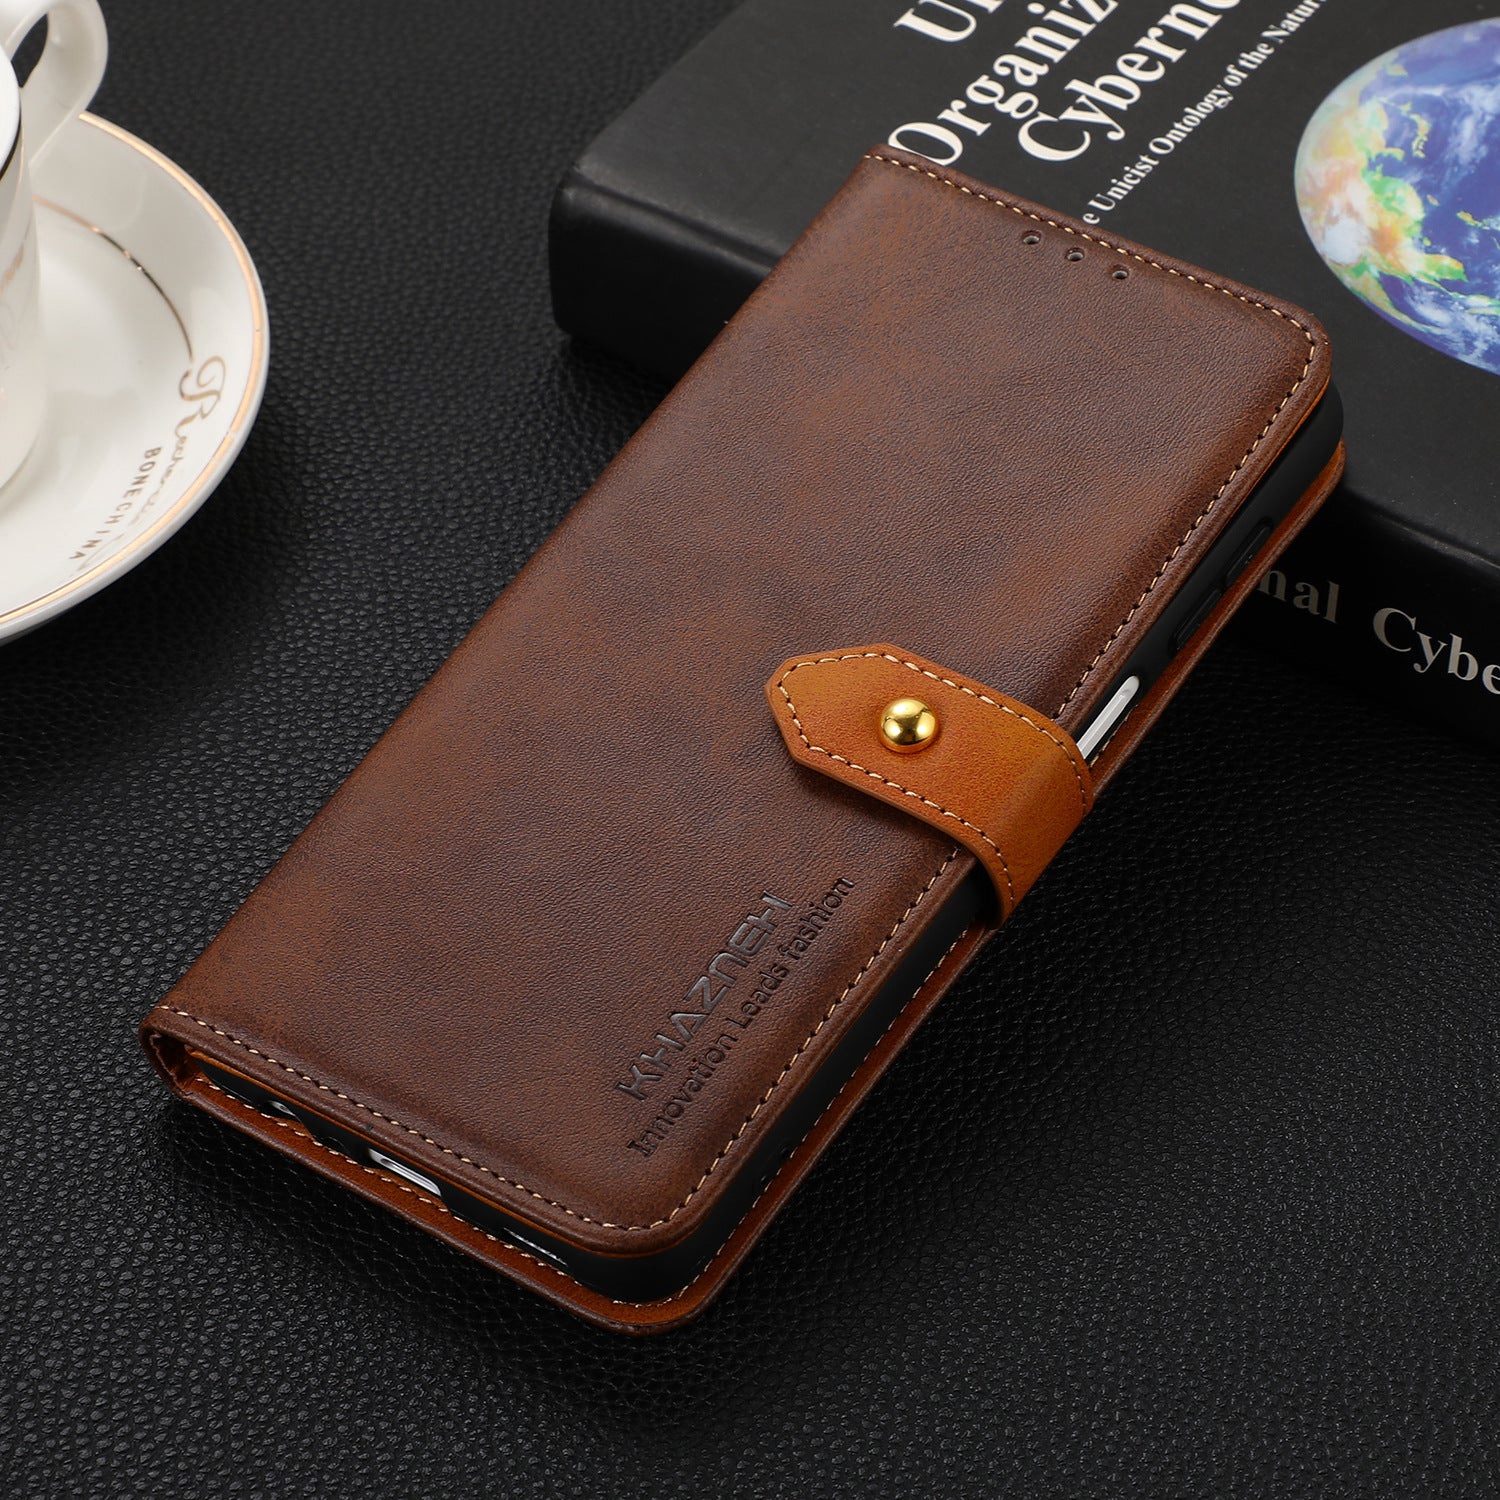 Stylish Phone Case Wallet with Card Slots For Moto